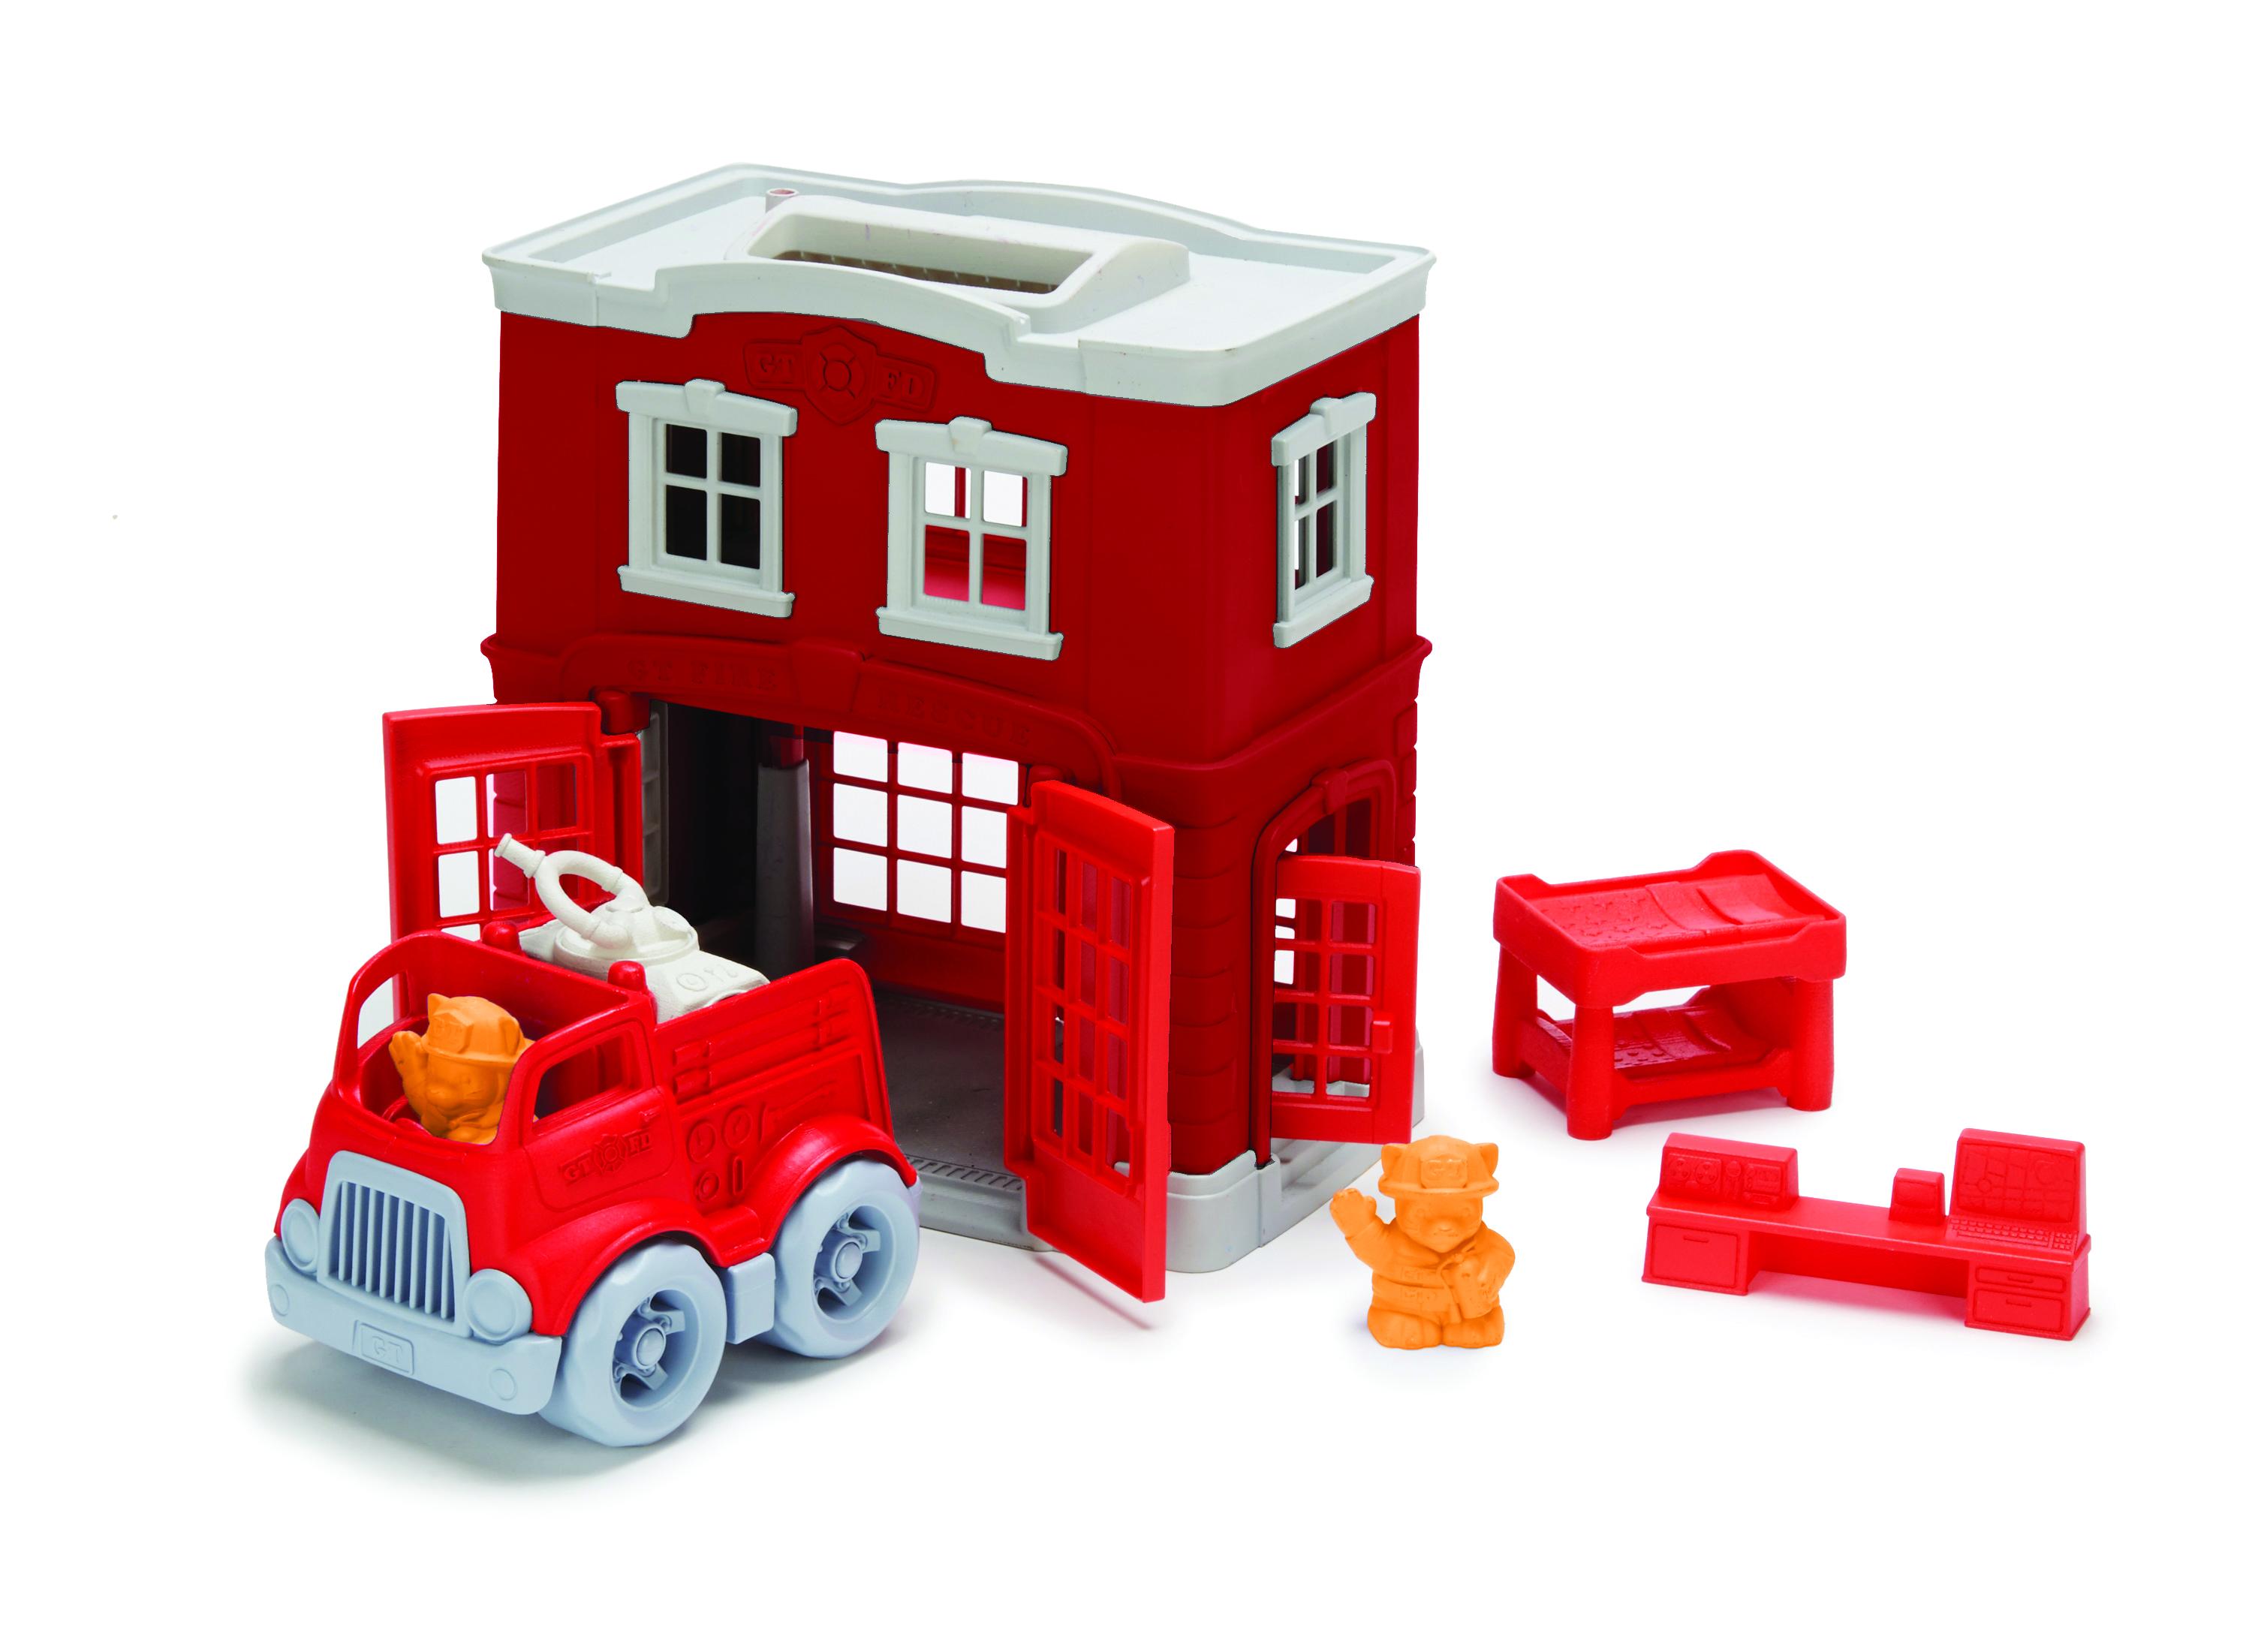 Green Toys Eco Friendly Firestation made from recycled plastic